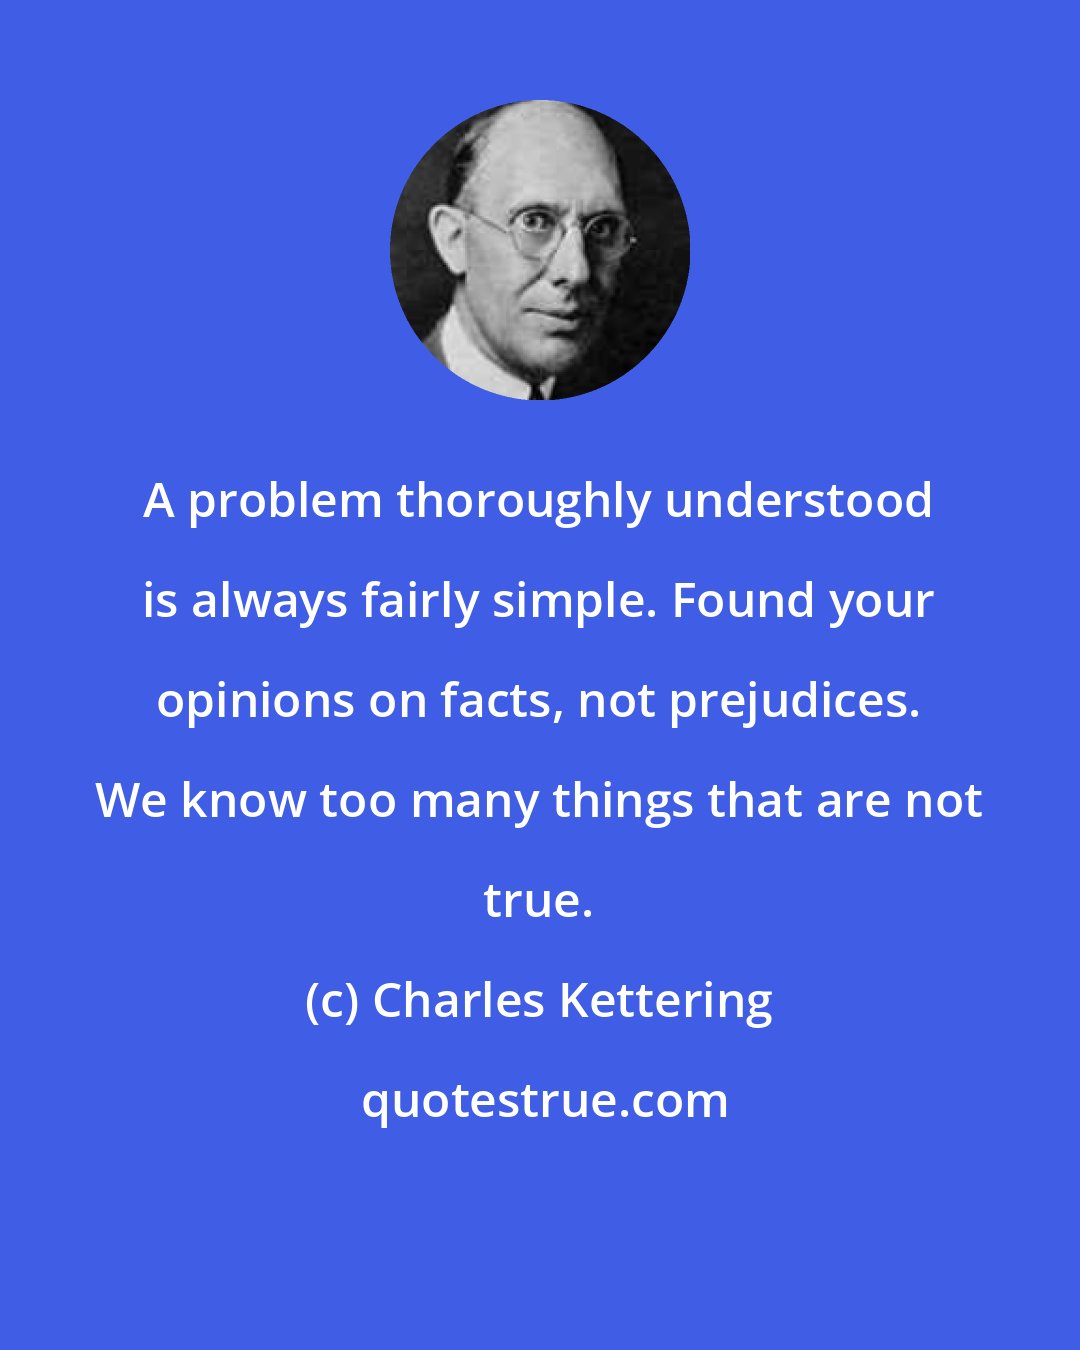 Charles Kettering: A problem thoroughly understood is always fairly simple. Found your opinions on facts, not prejudices. We know too many things that are not true.